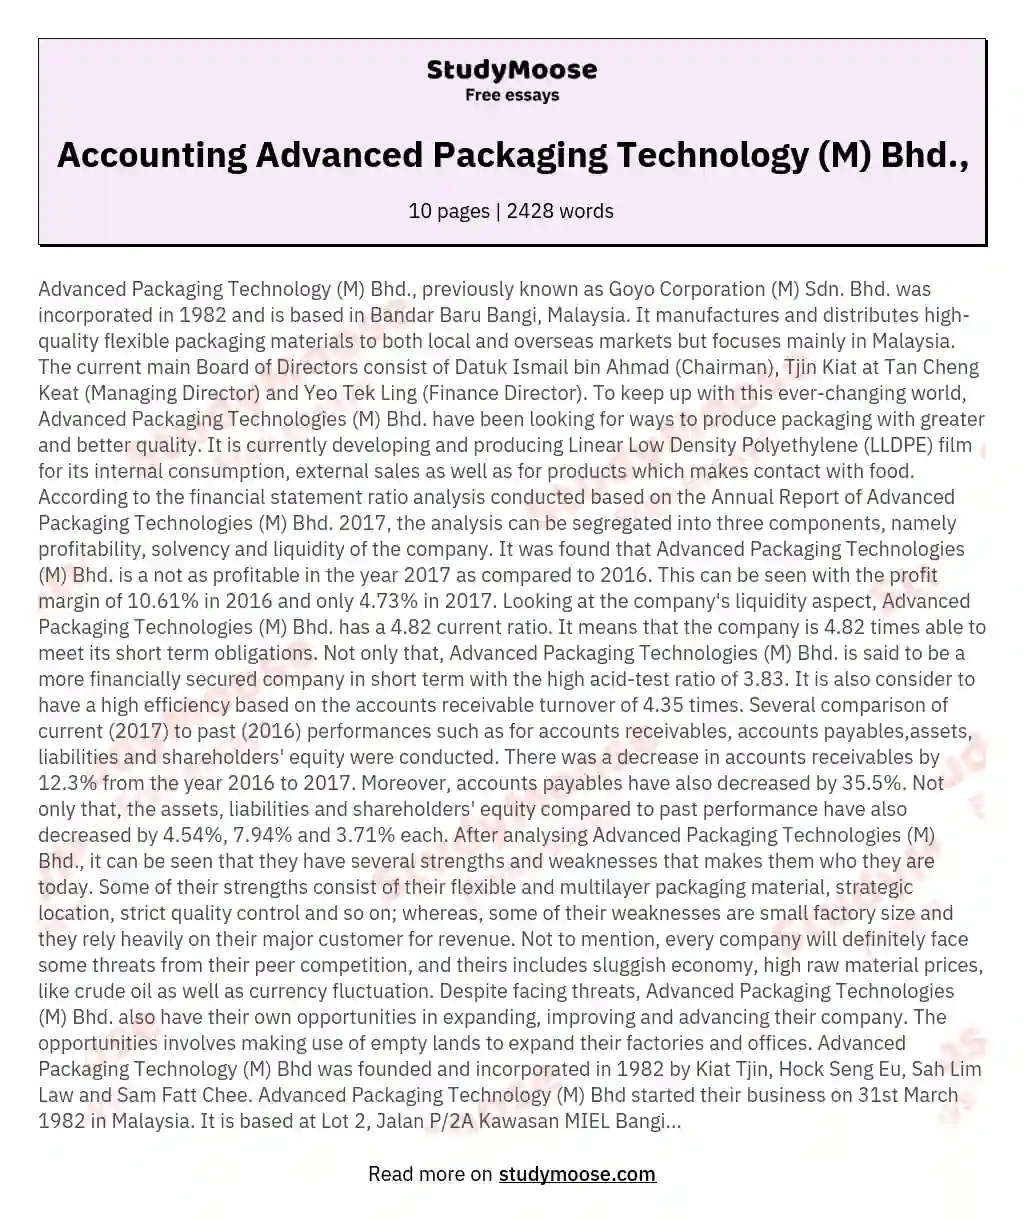 Accounting Advanced Packaging Technology (M) Bhd.,